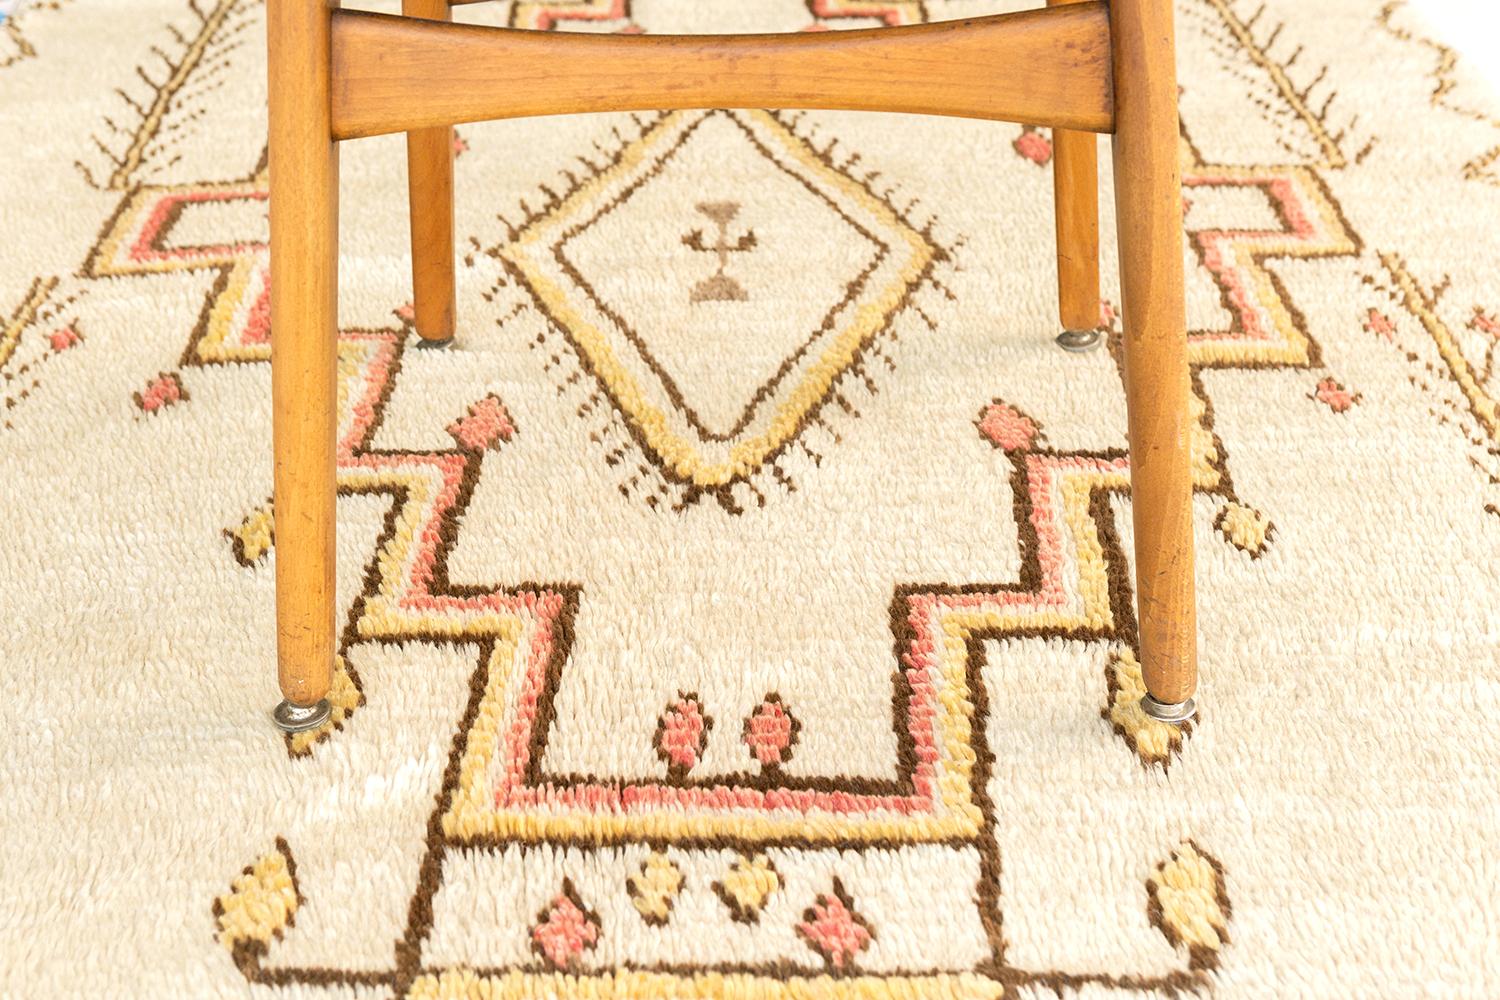 Emanating grace and sophistication, this Vintage Moroccan Azilal Tribe rug features a symbolic pattern in the subtle tones of french rose, cream, tan and ivory. The tribal design composed of varying lozenges with solid and jagged edges, fishbones